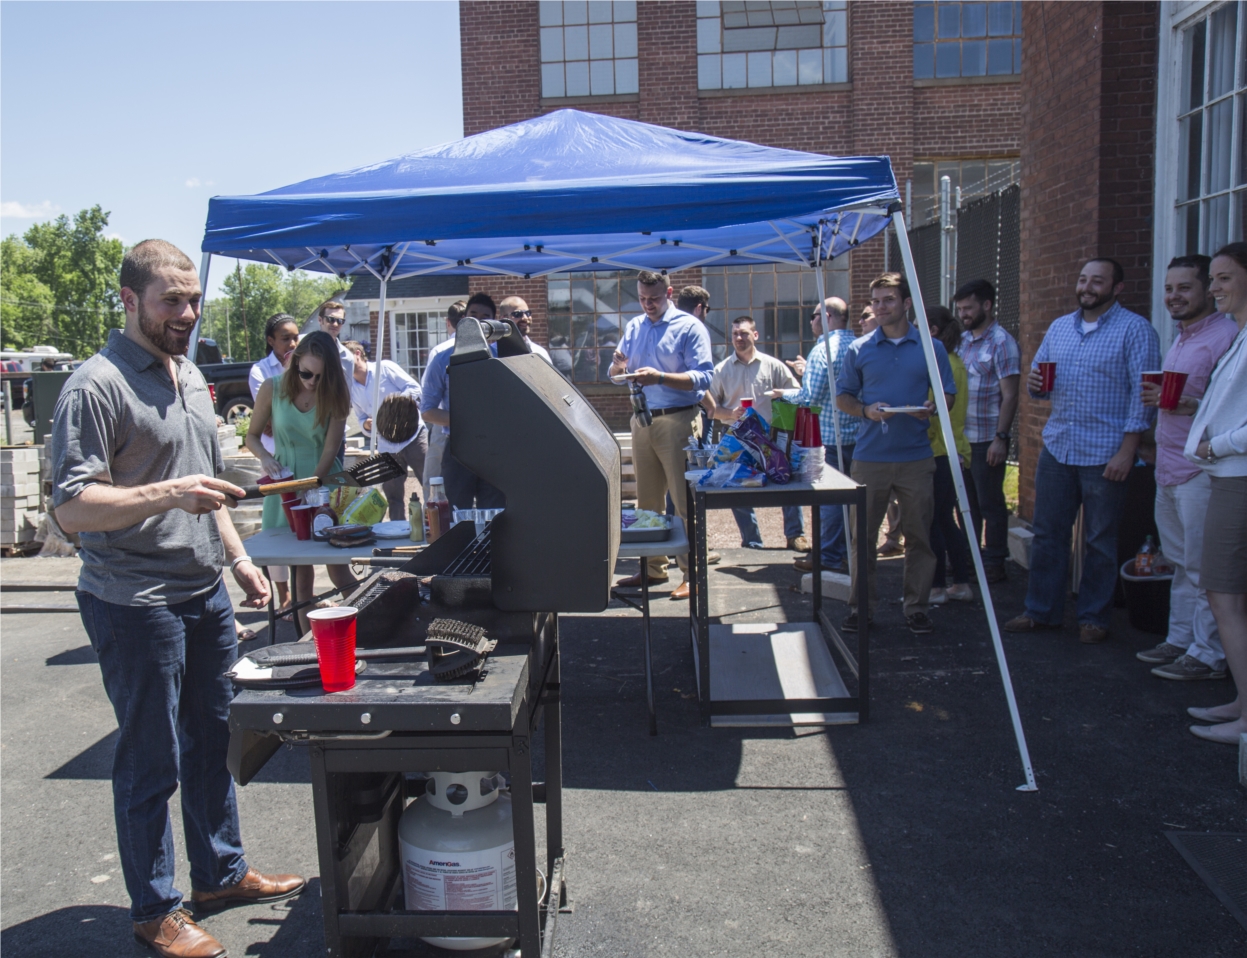 Greenskies team members cooking and enjoying a Monday barbecue lunch